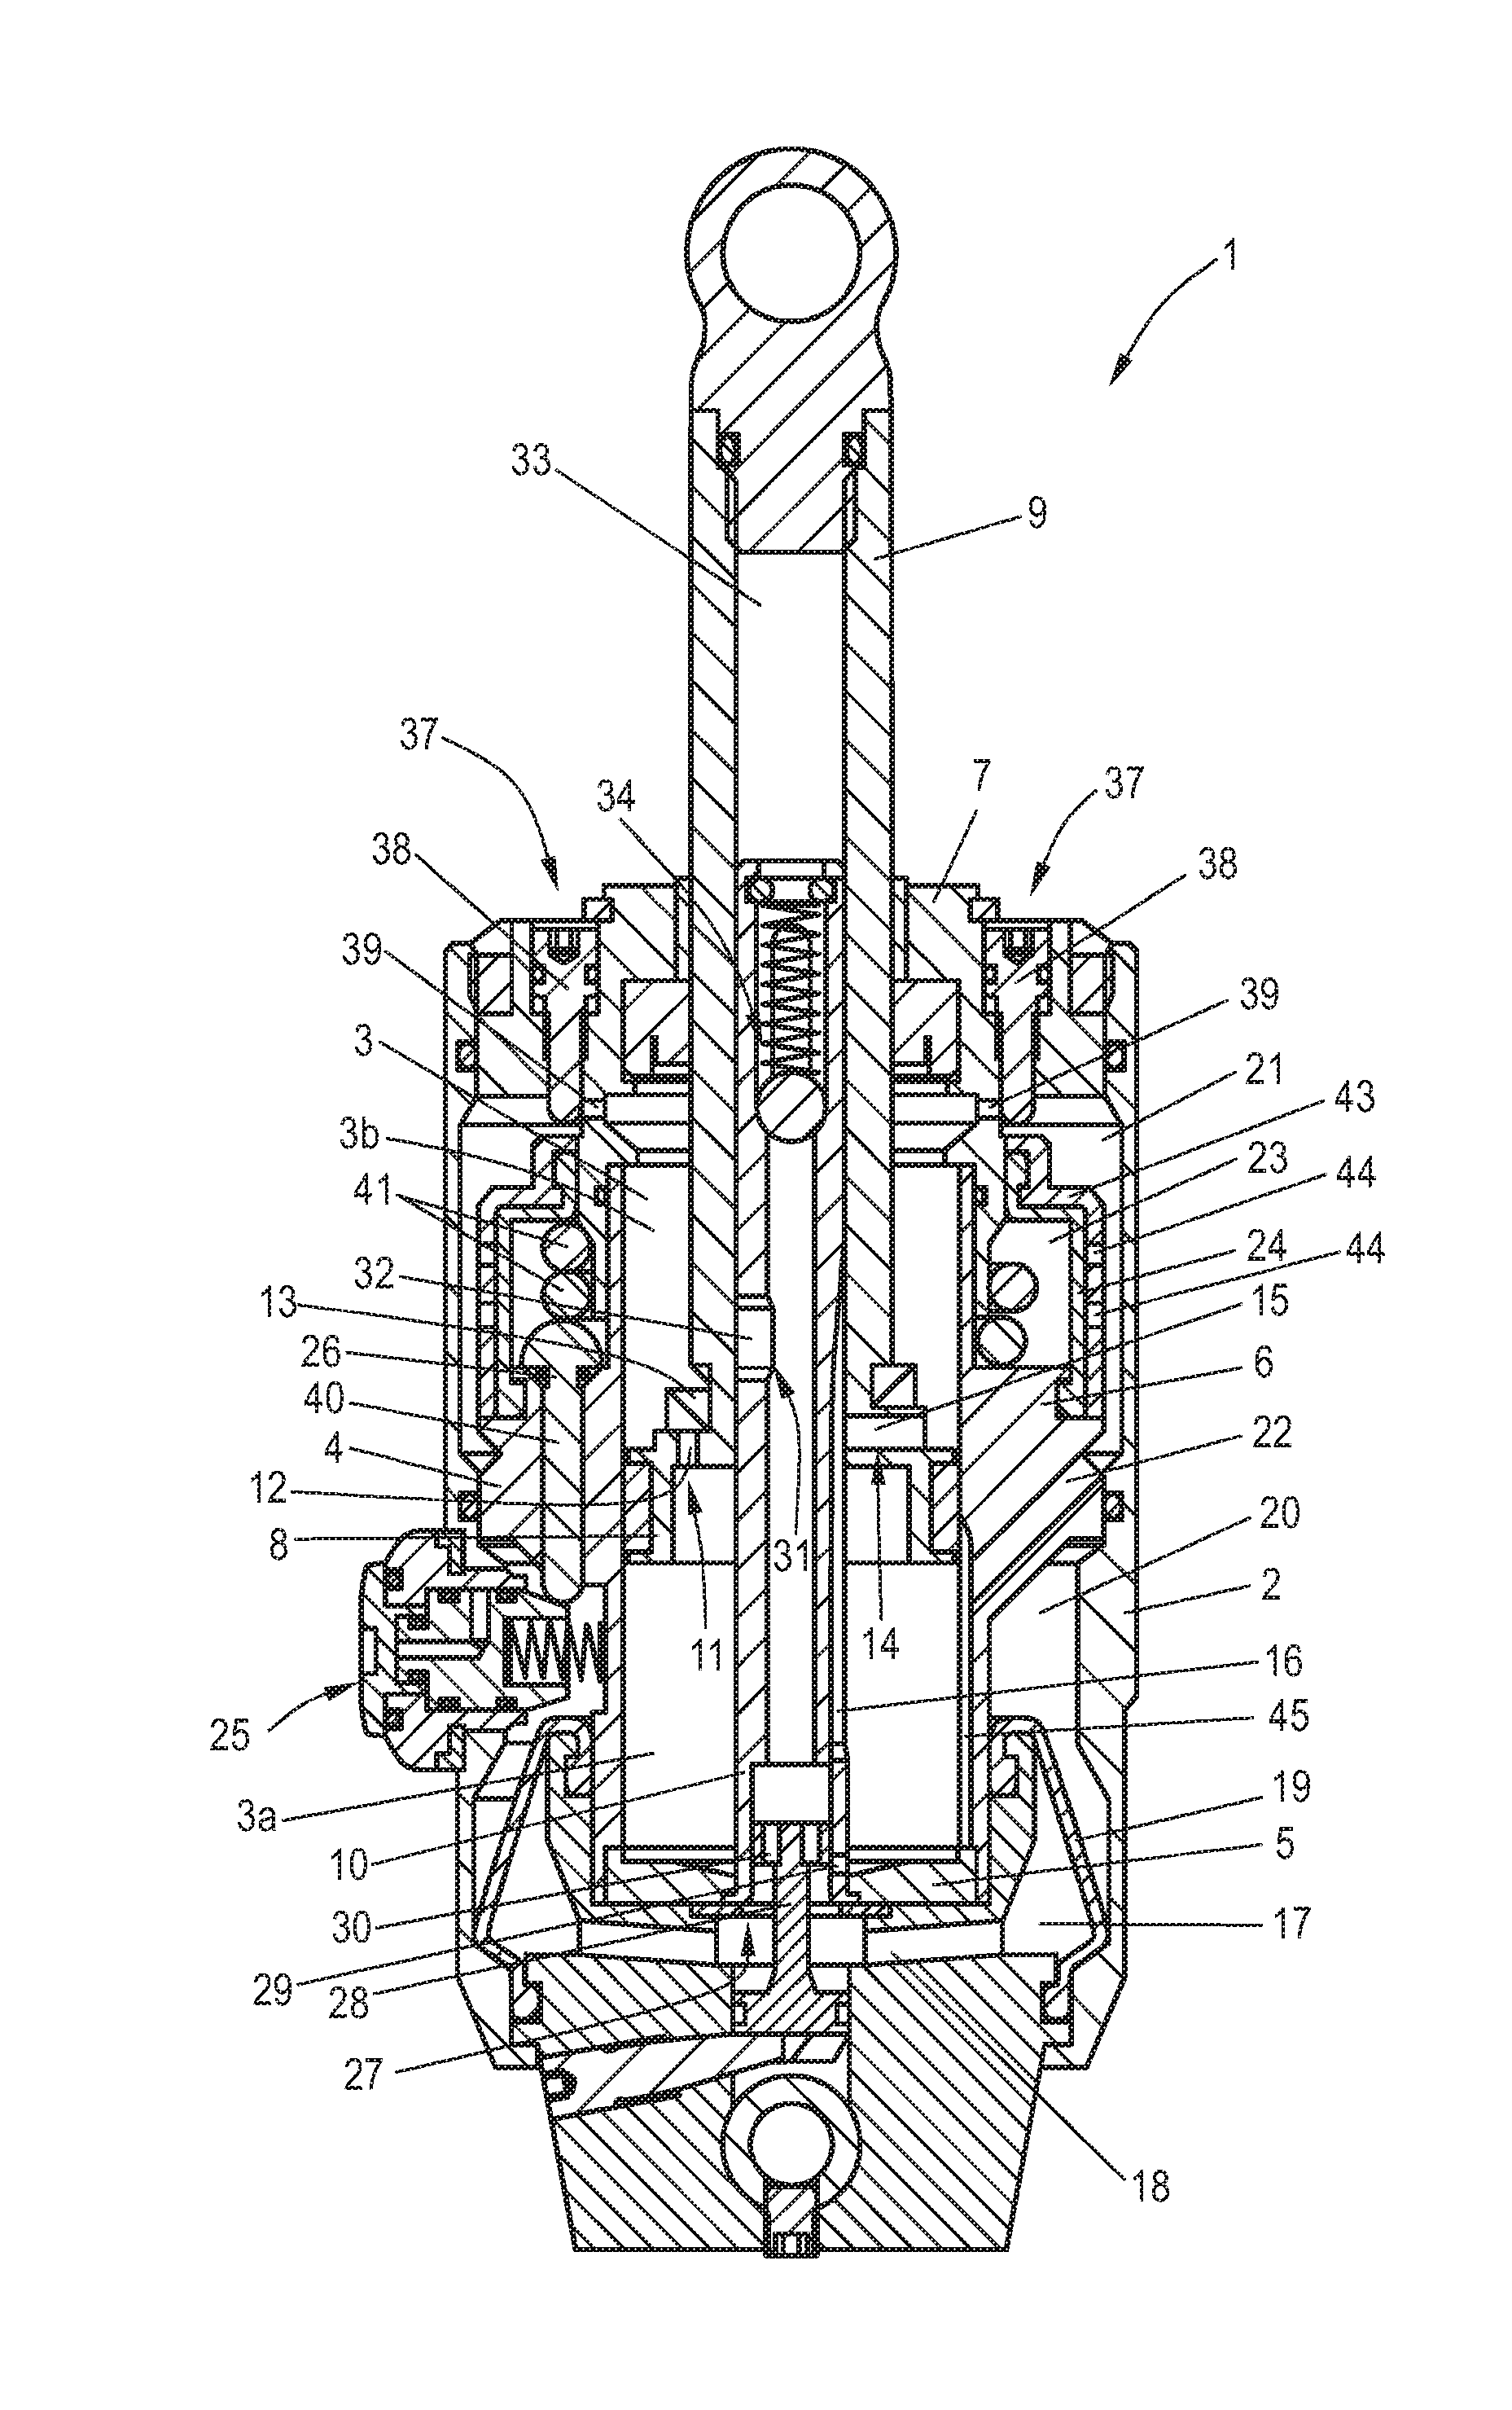 Hydraulic damping cylinder, in particular for a knee prosthesis